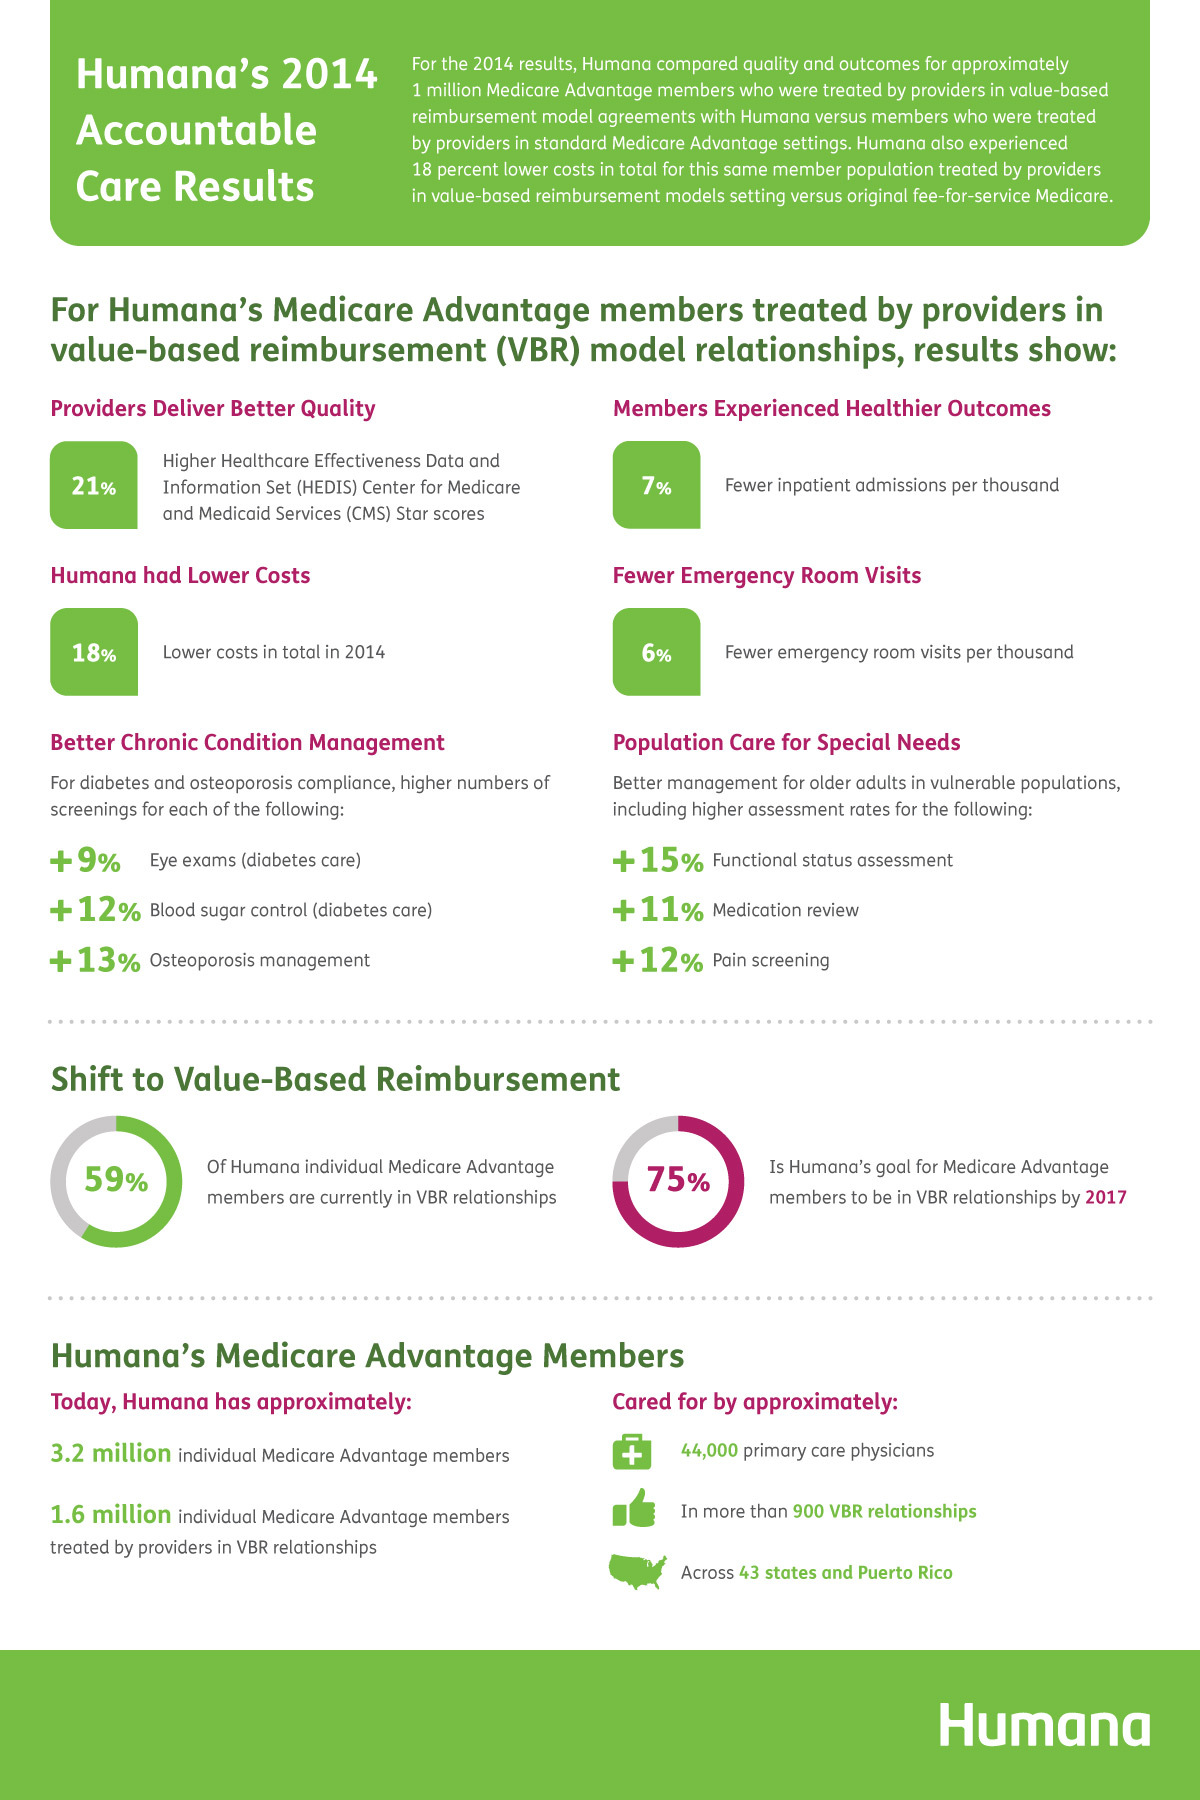 Humana Medicare Advantage Members Show Better Health and Quality